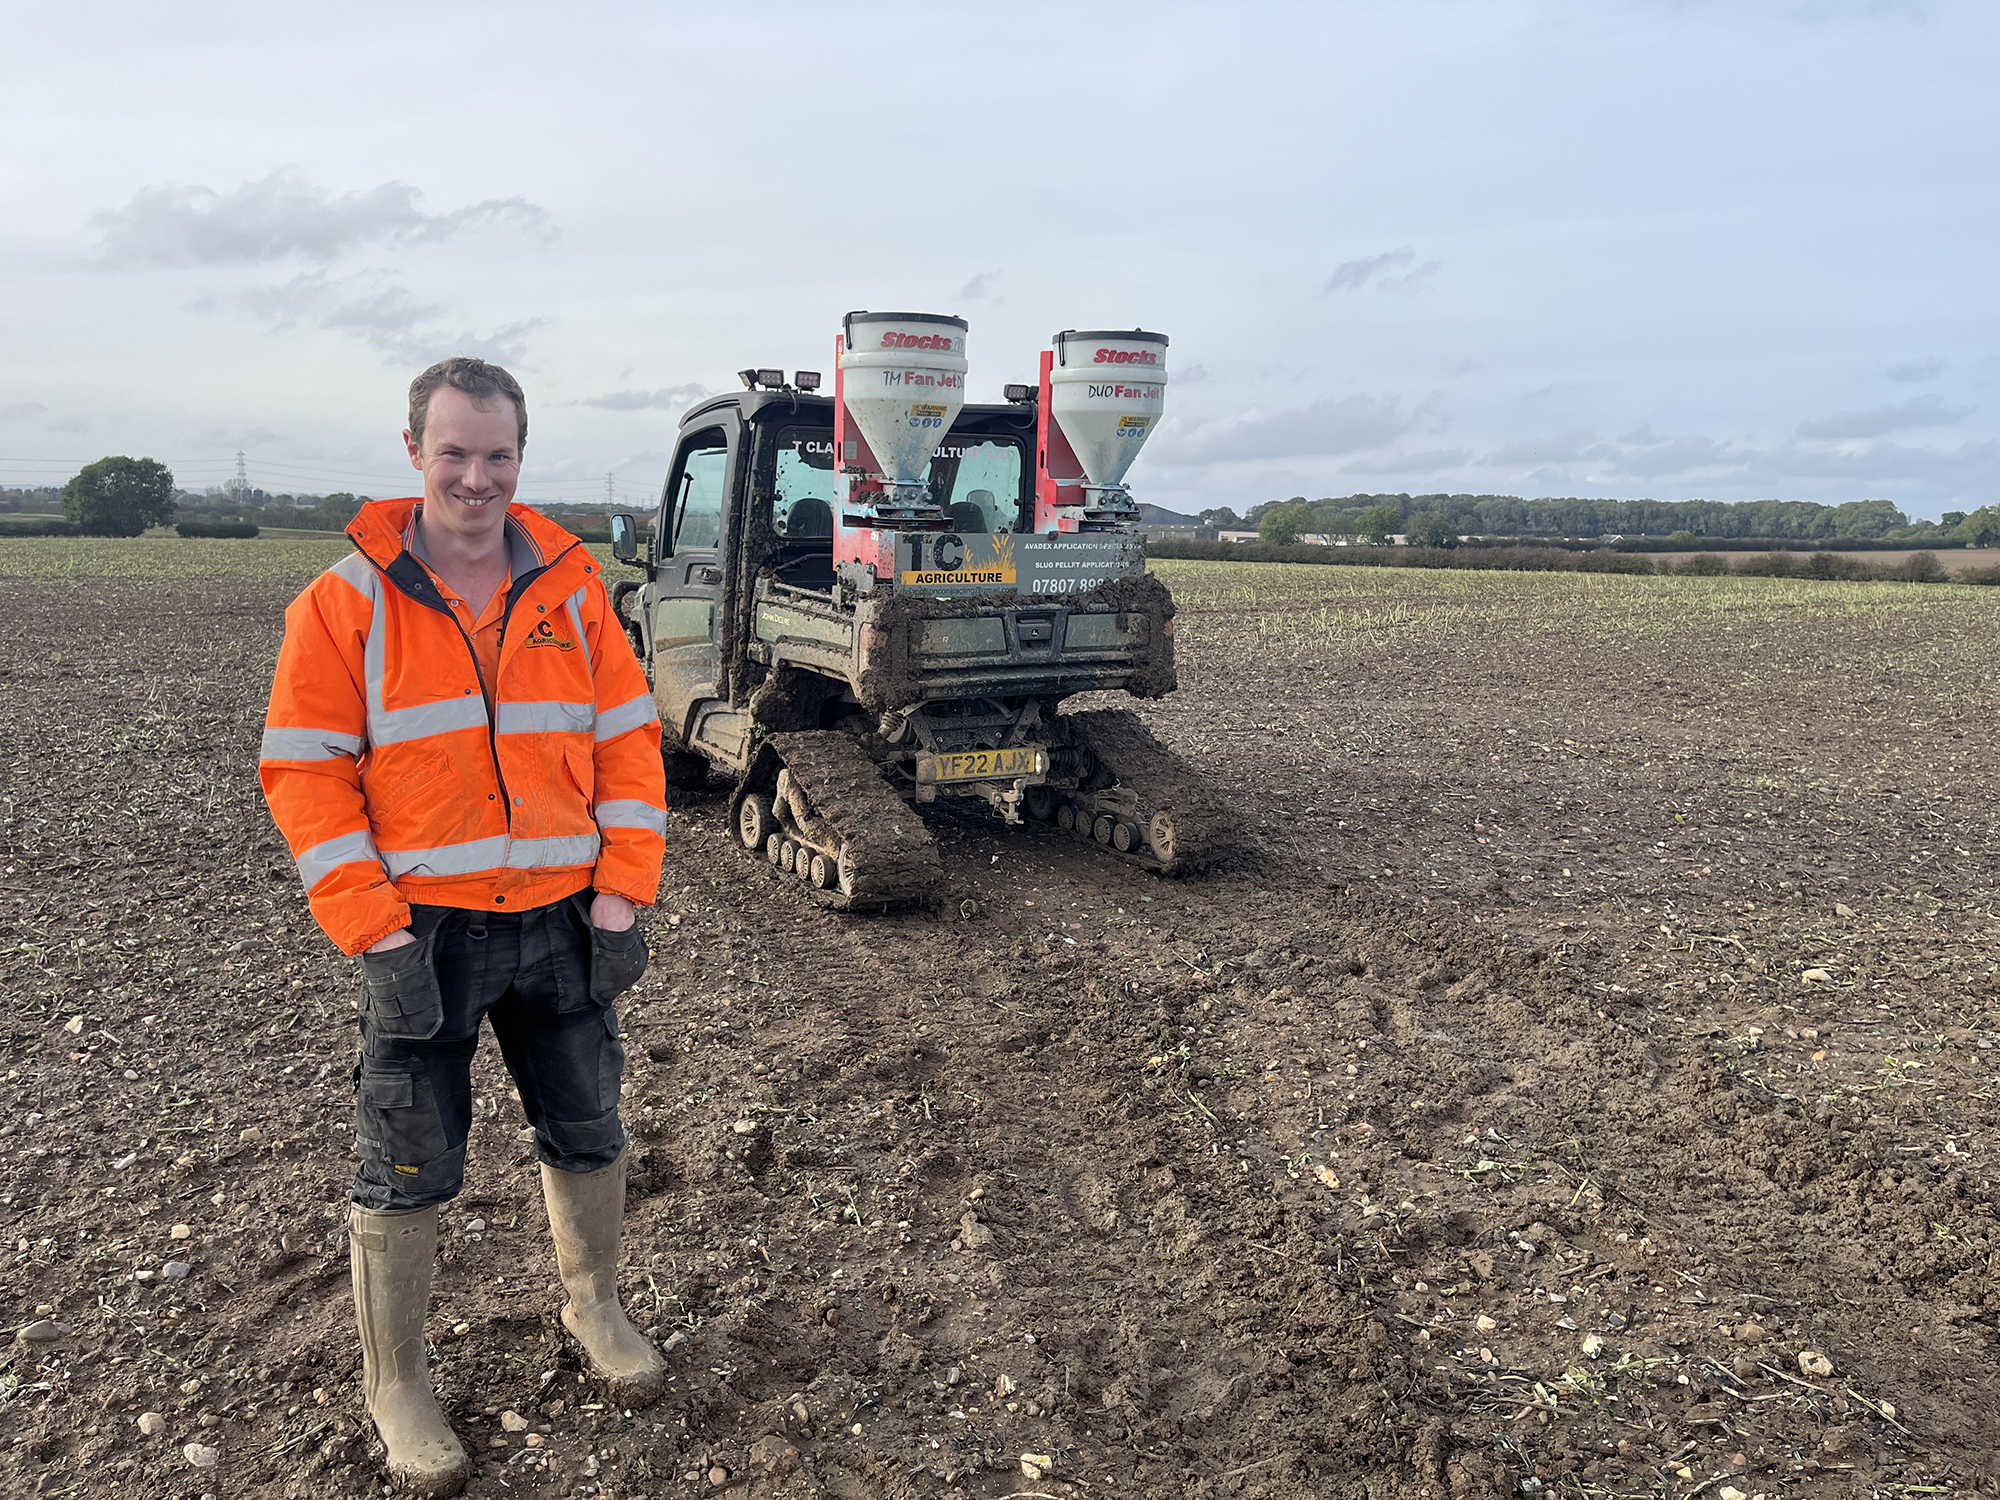 Tim Clappison with his Stocks Ag Fan Jet Duo applicator